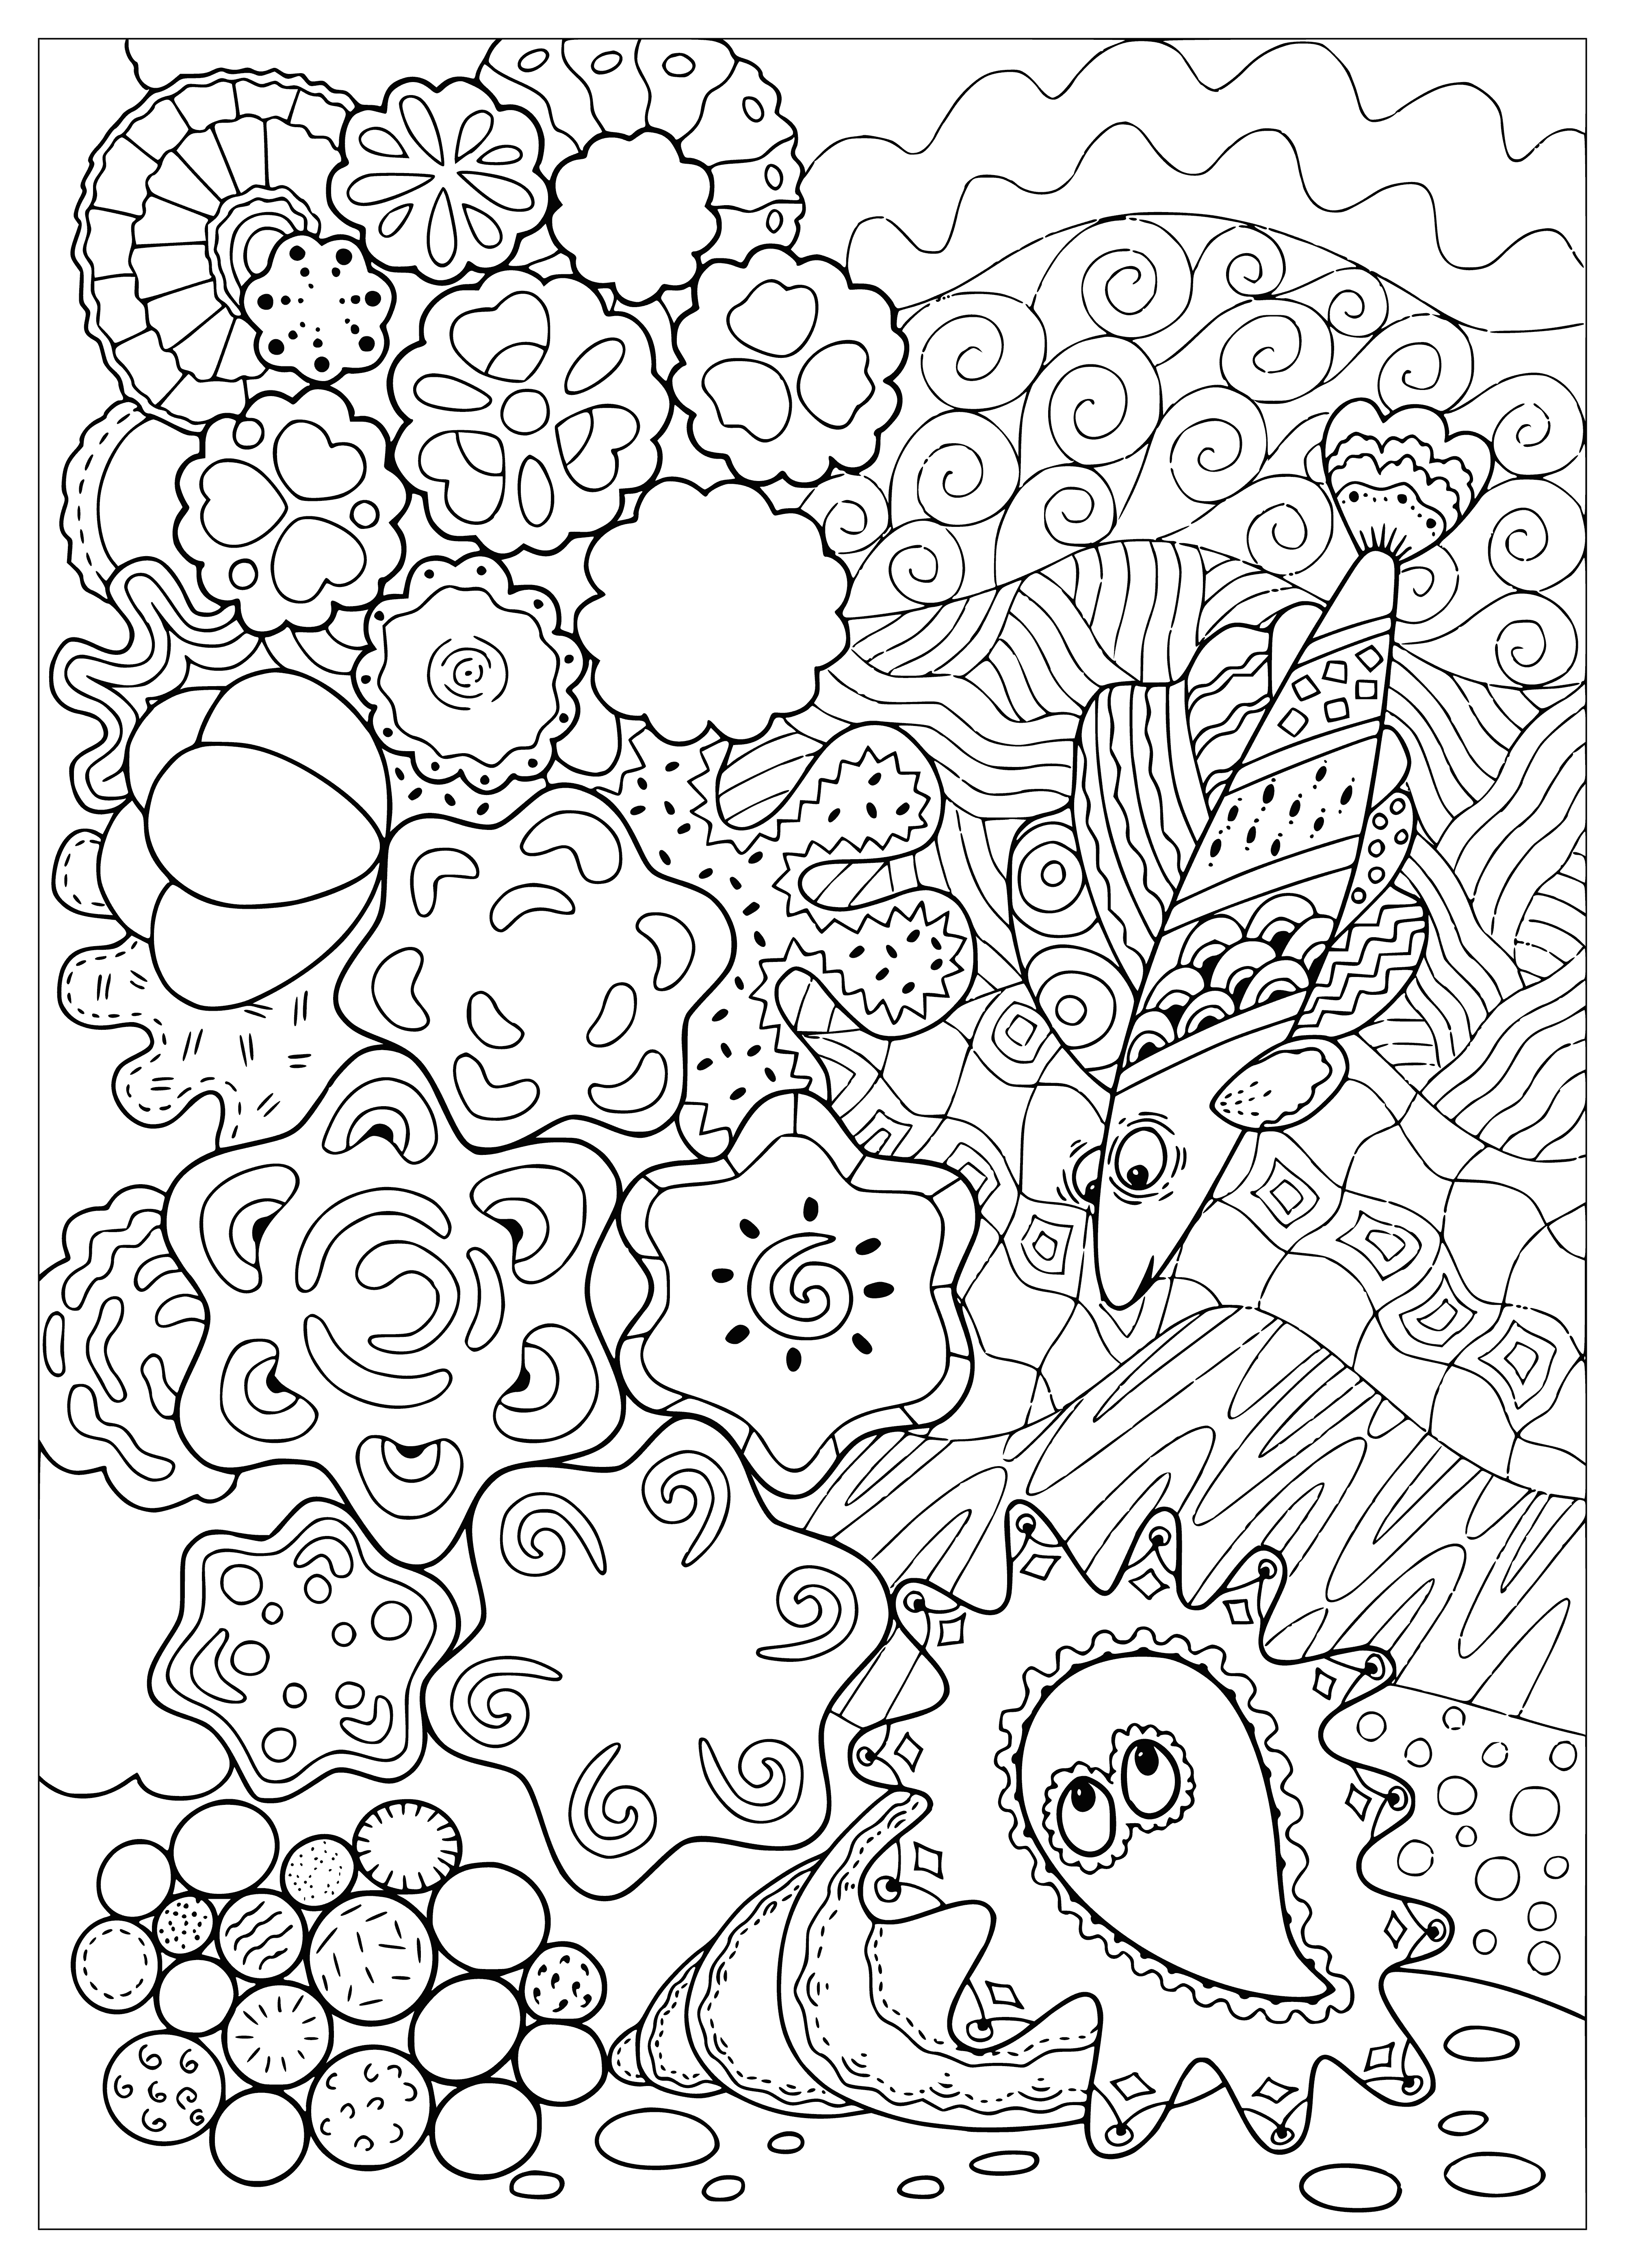 Marine life coloring page